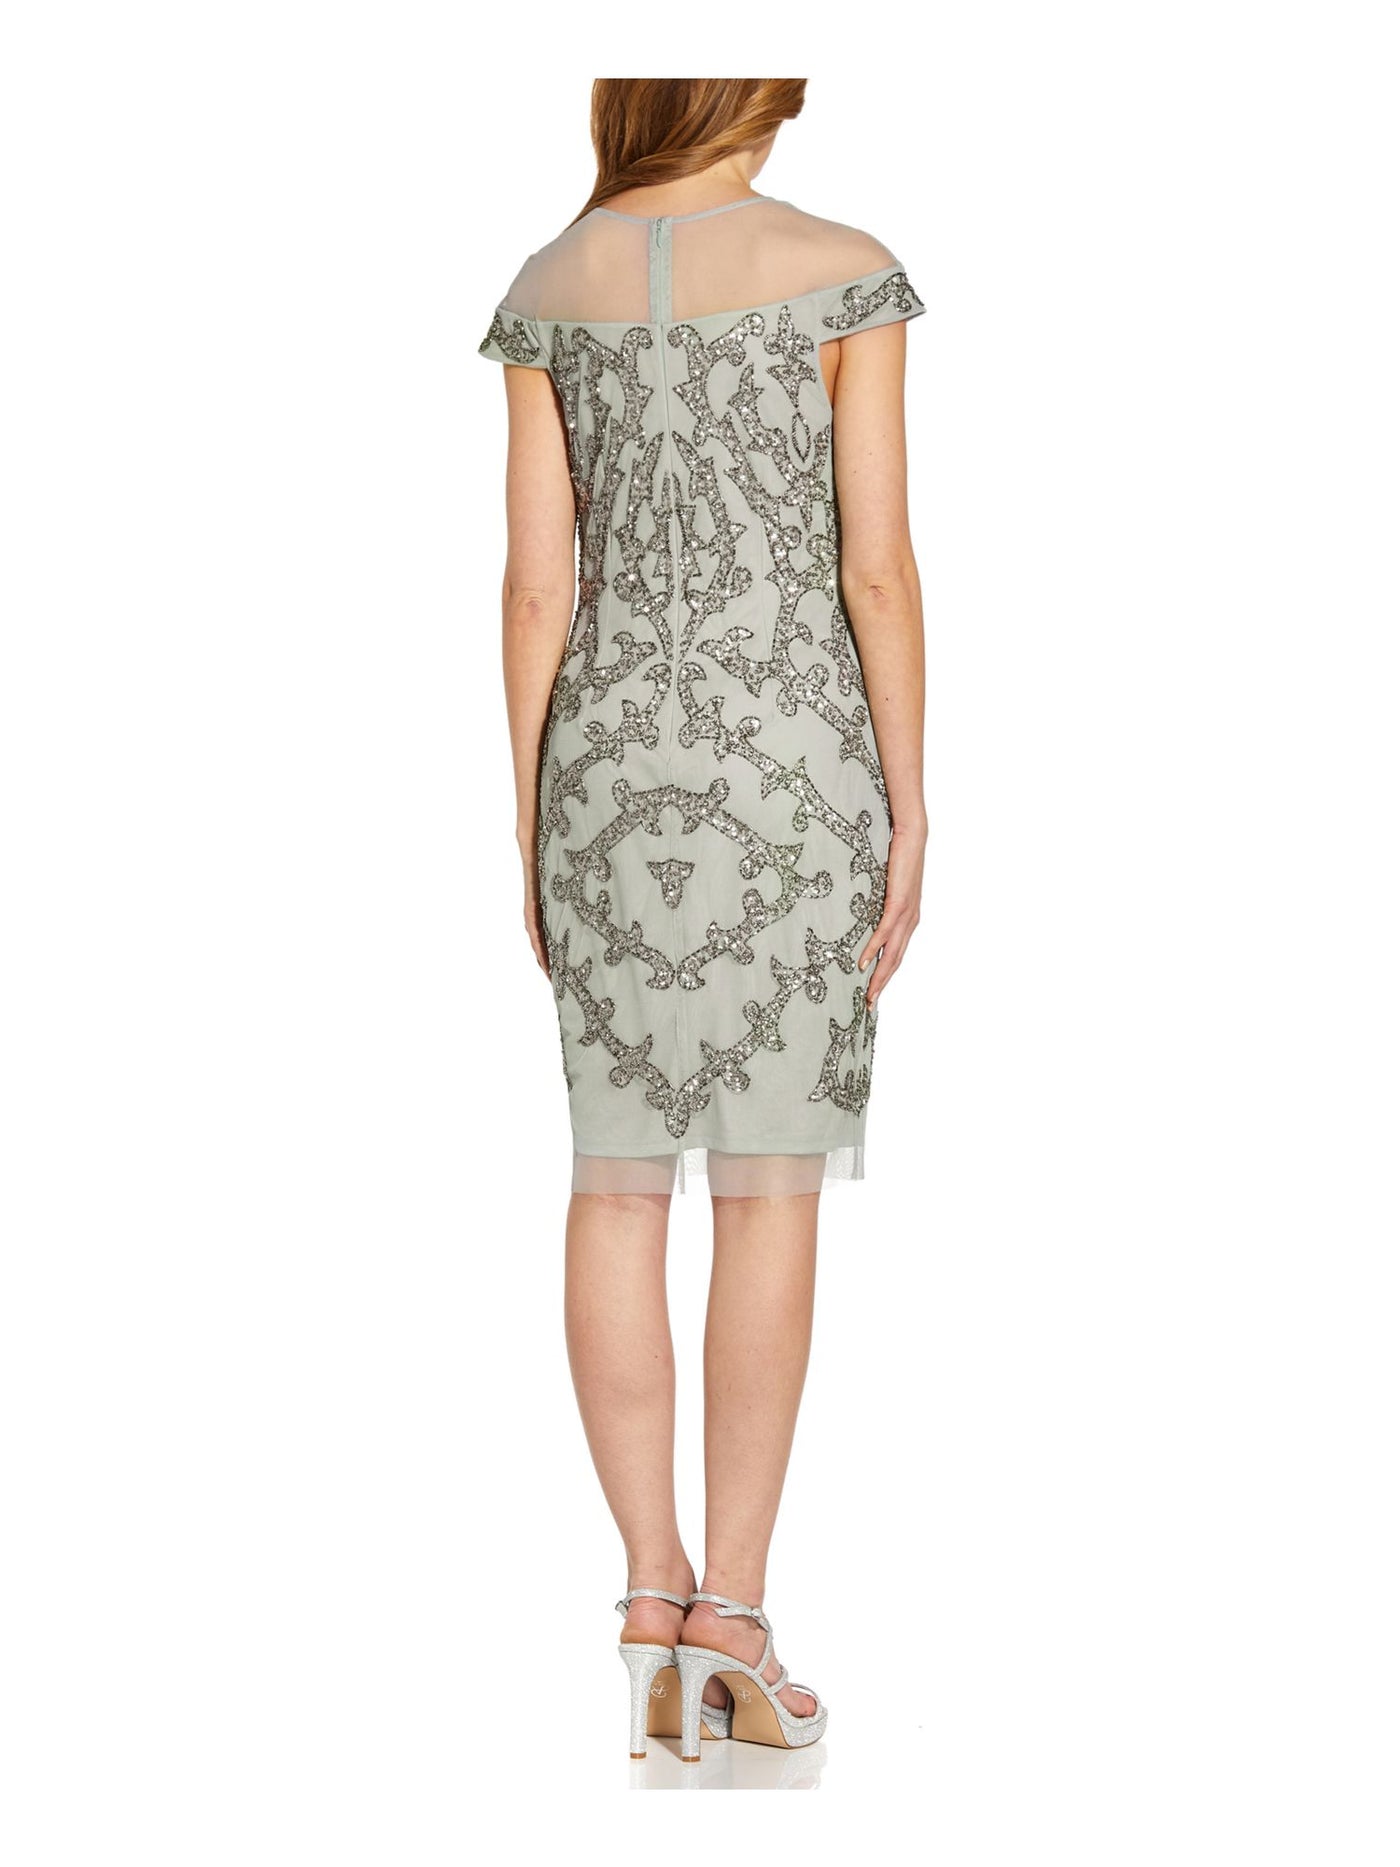 ADRIANNA PAPELL Womens Sequined Zippered Cap Sleeve Illusion Neckline Above The Knee Party Sheath Dress